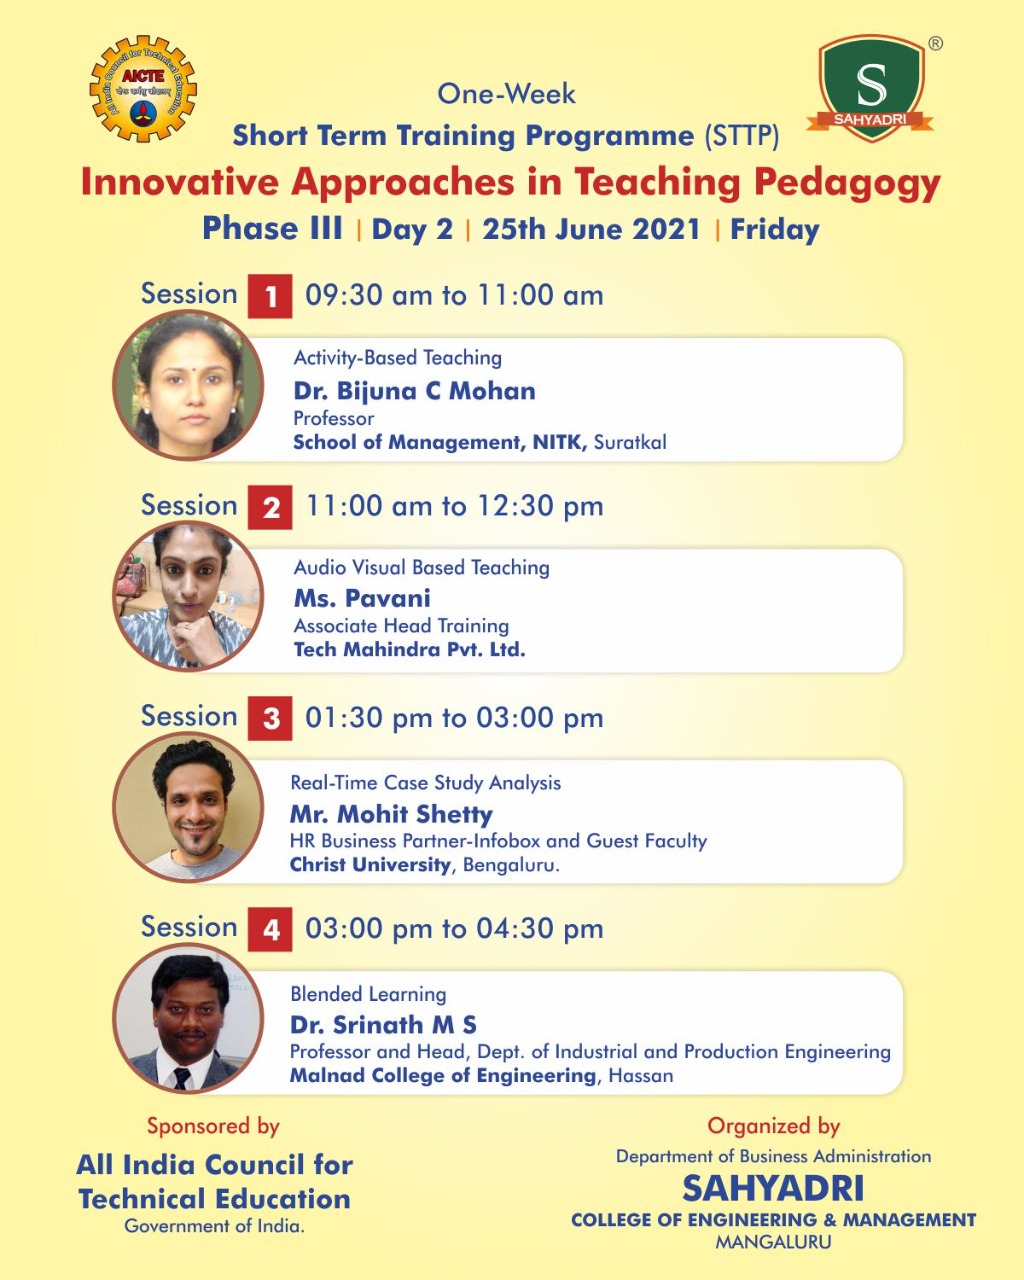 Phase III: AICTE Sponsored One-Week STTP on “Innovative Approaches in Teaching Pedagogy”